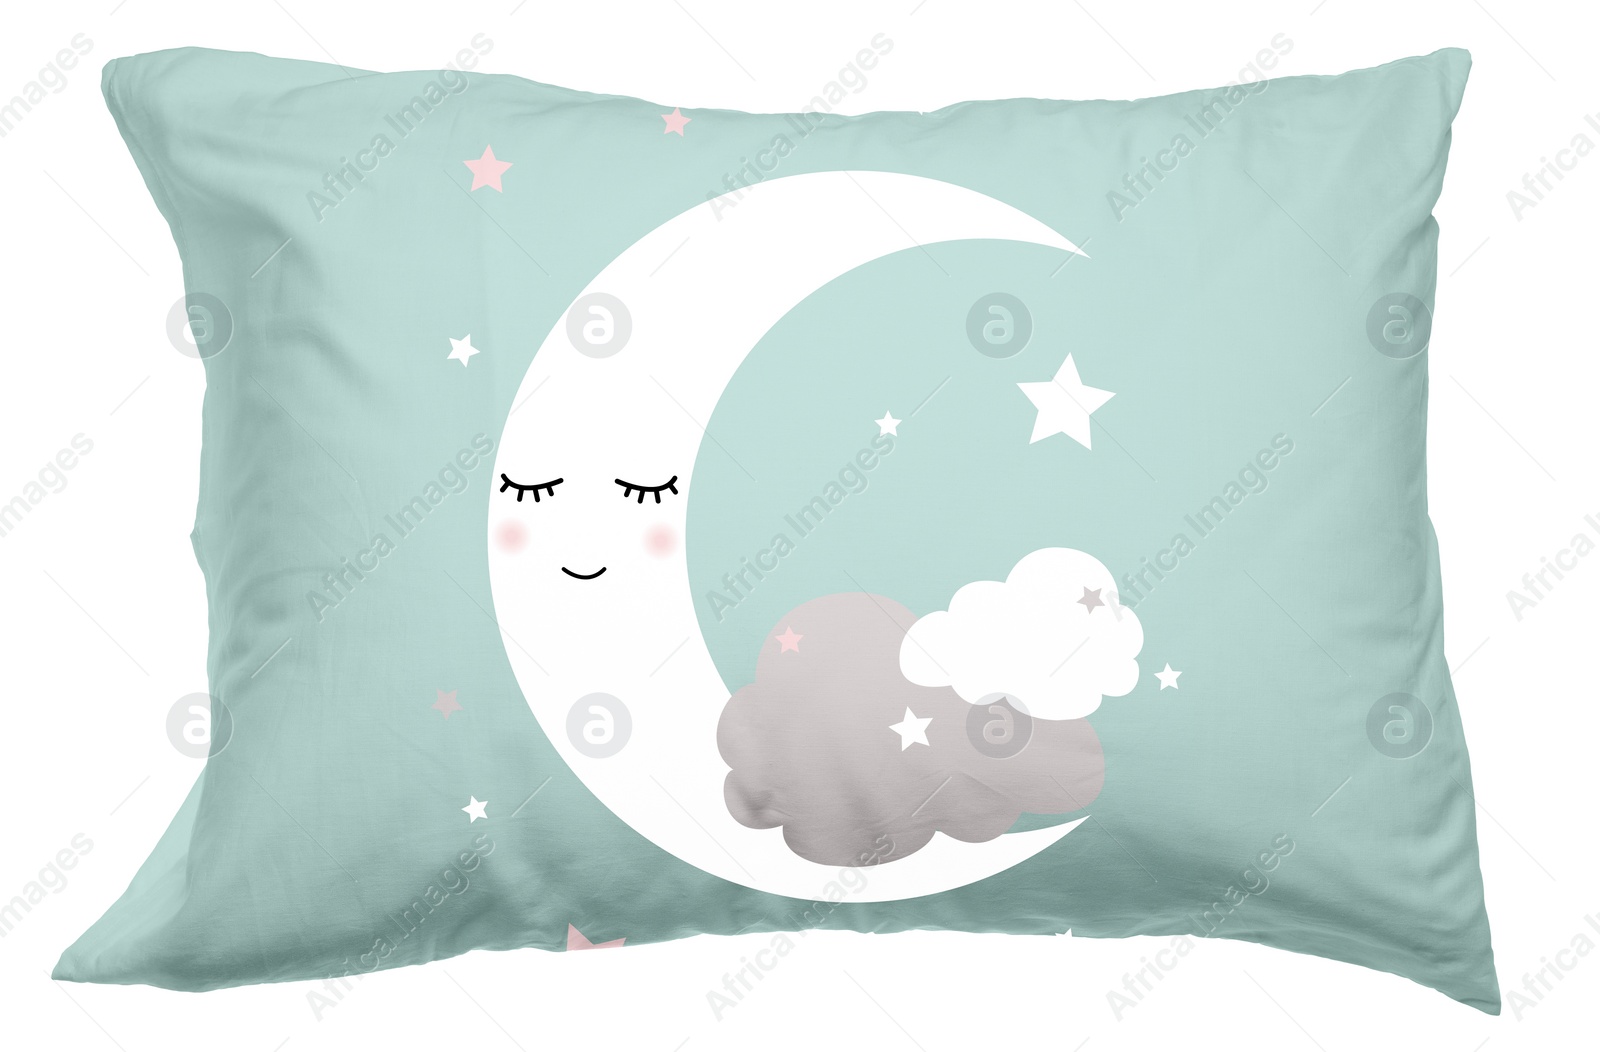 Image of Soft pillow with printed cute crescent moon and clouds isolated on white